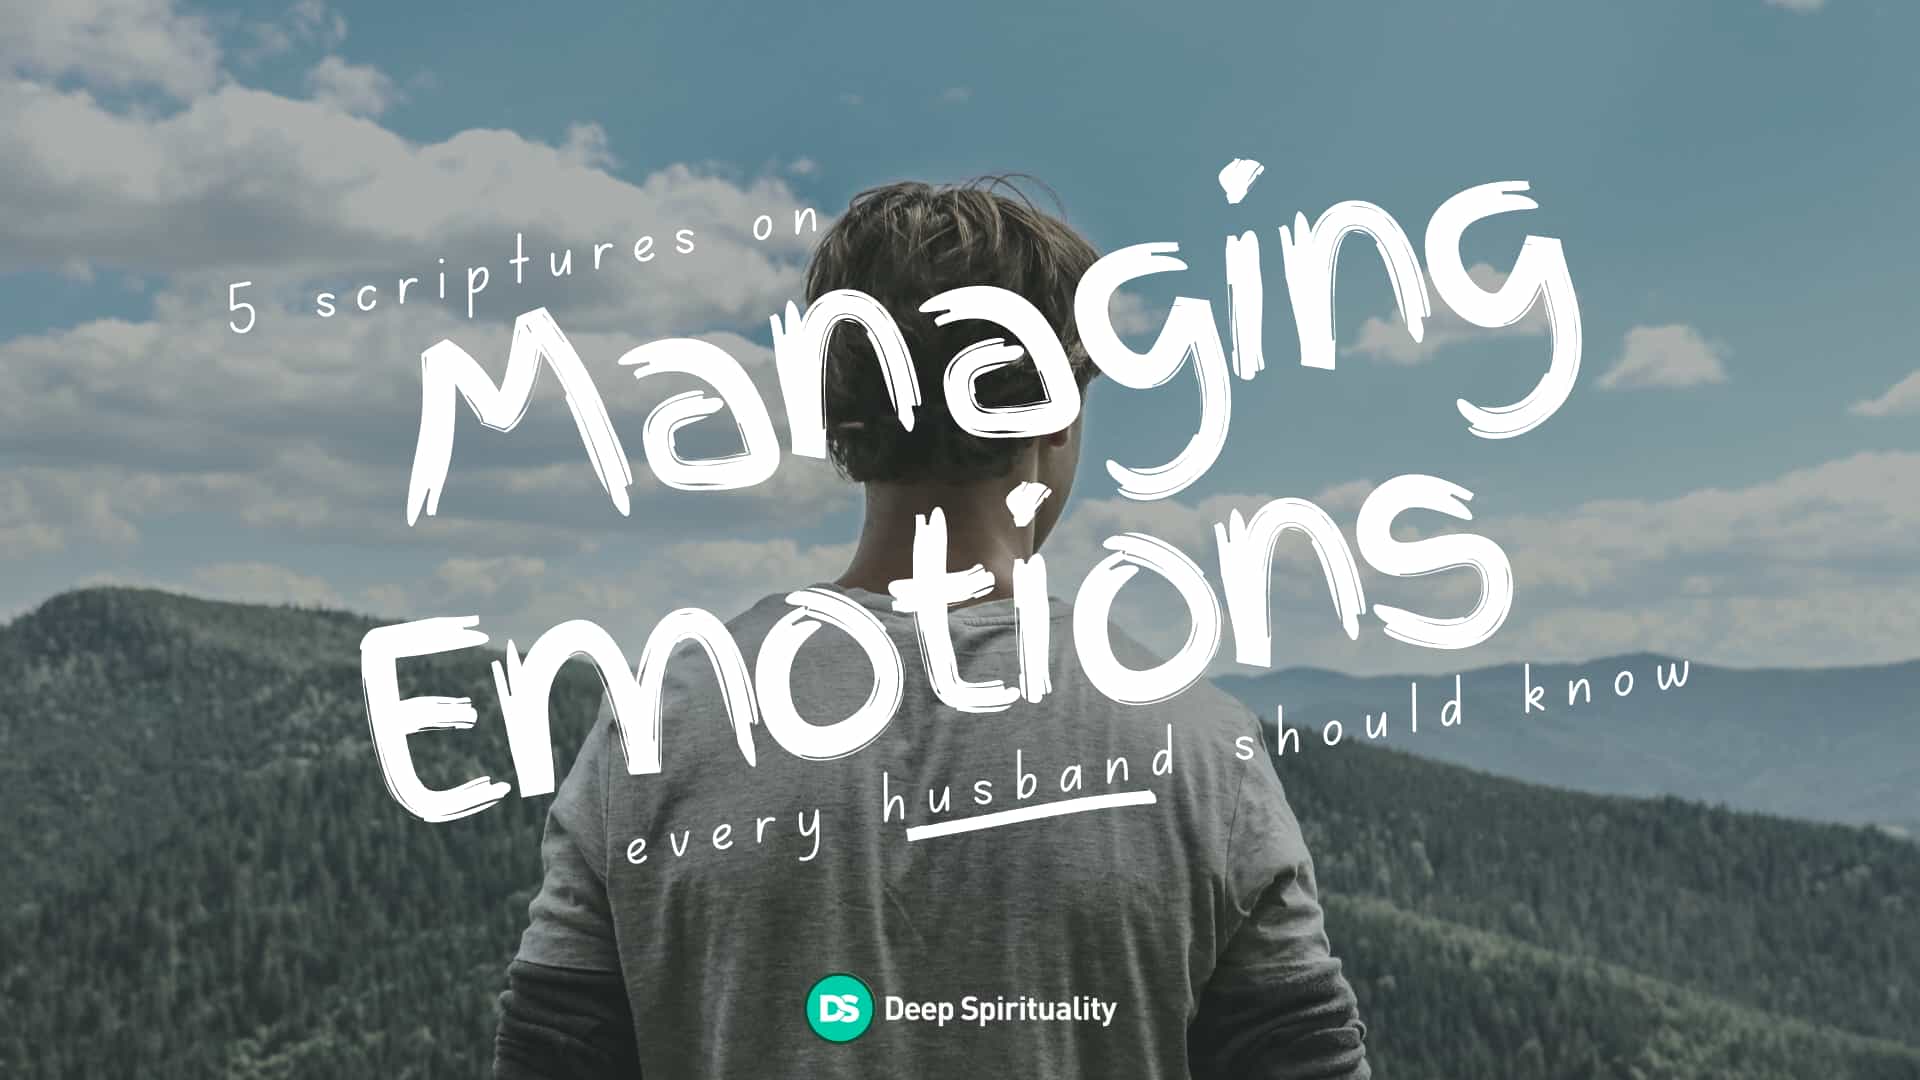 5 Scriptures on Managing Emotions Every Husband Should Know 5